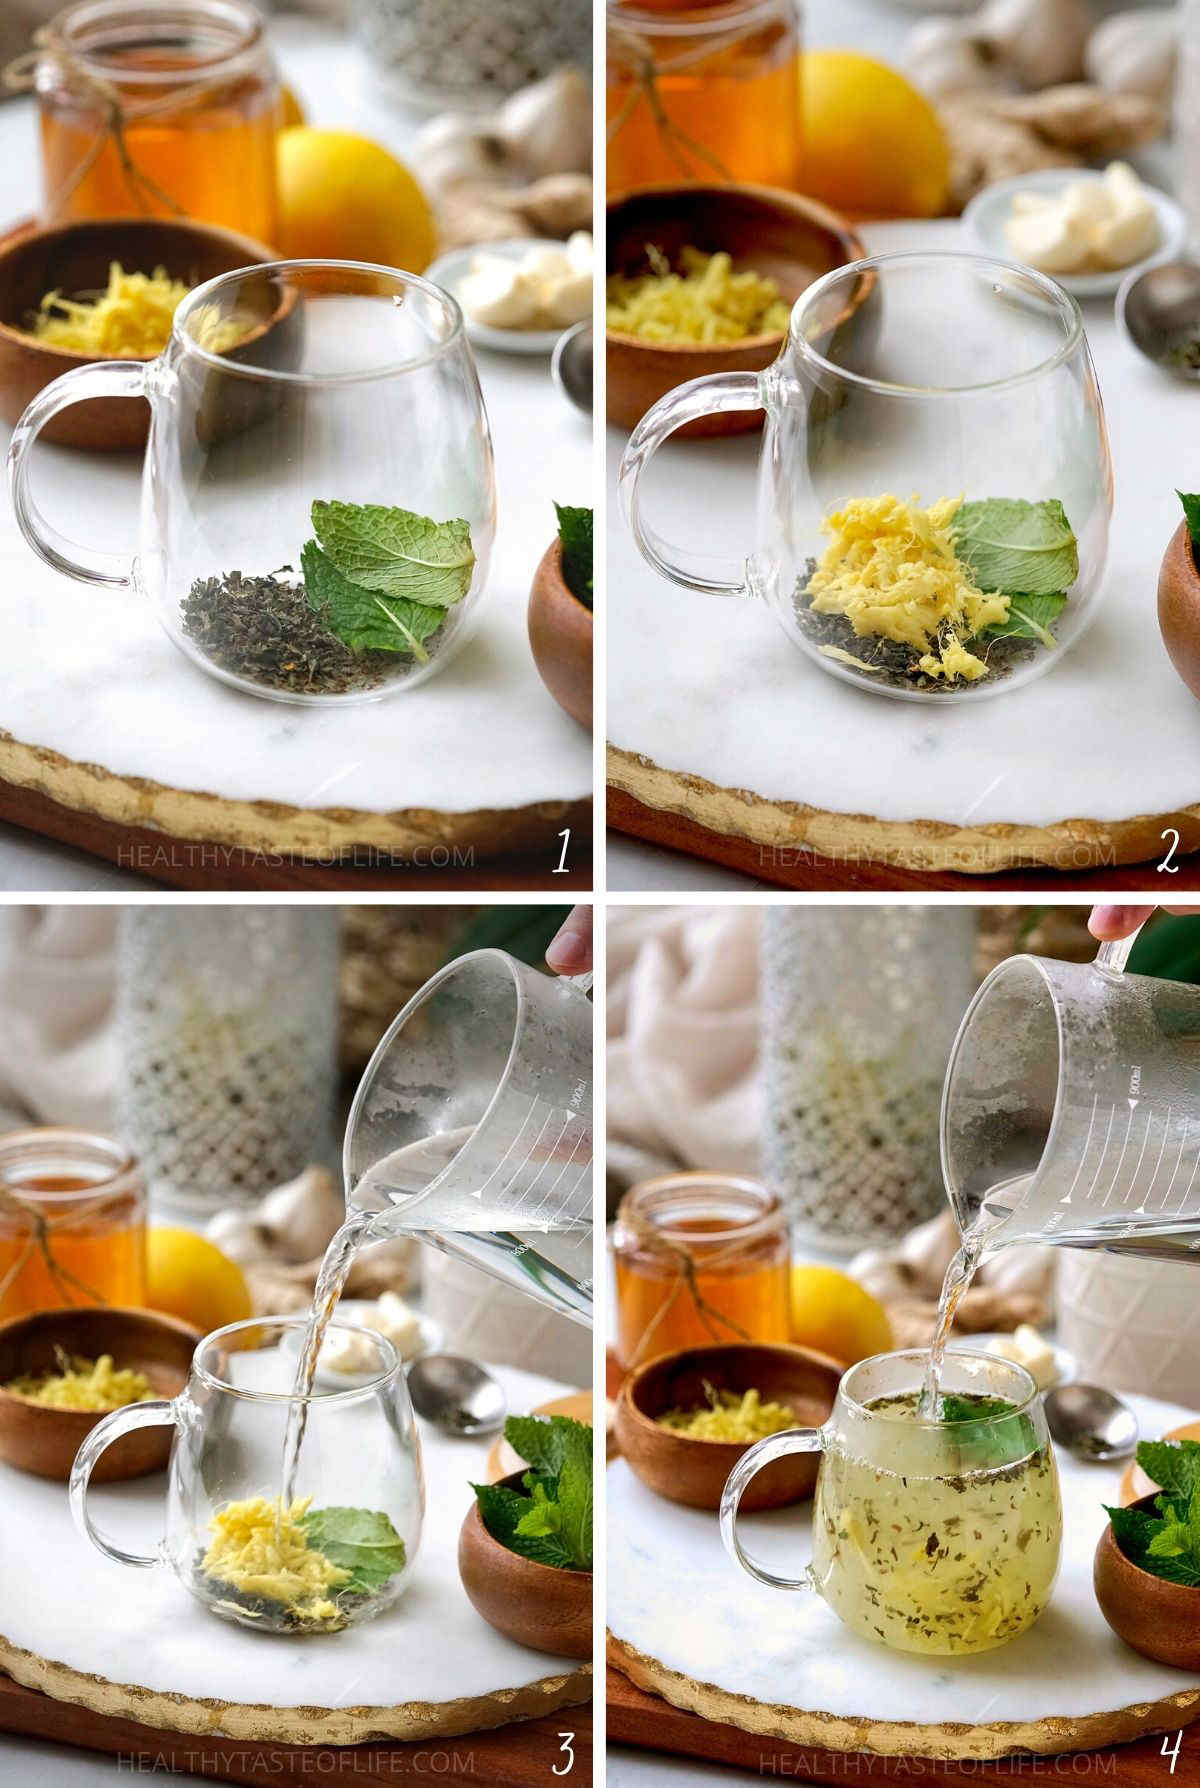 Step by step photos on how to make the flu bomb drink - the immune booster drink or tea for cold and flu by steeping herbs lemon ginger garlic honey.